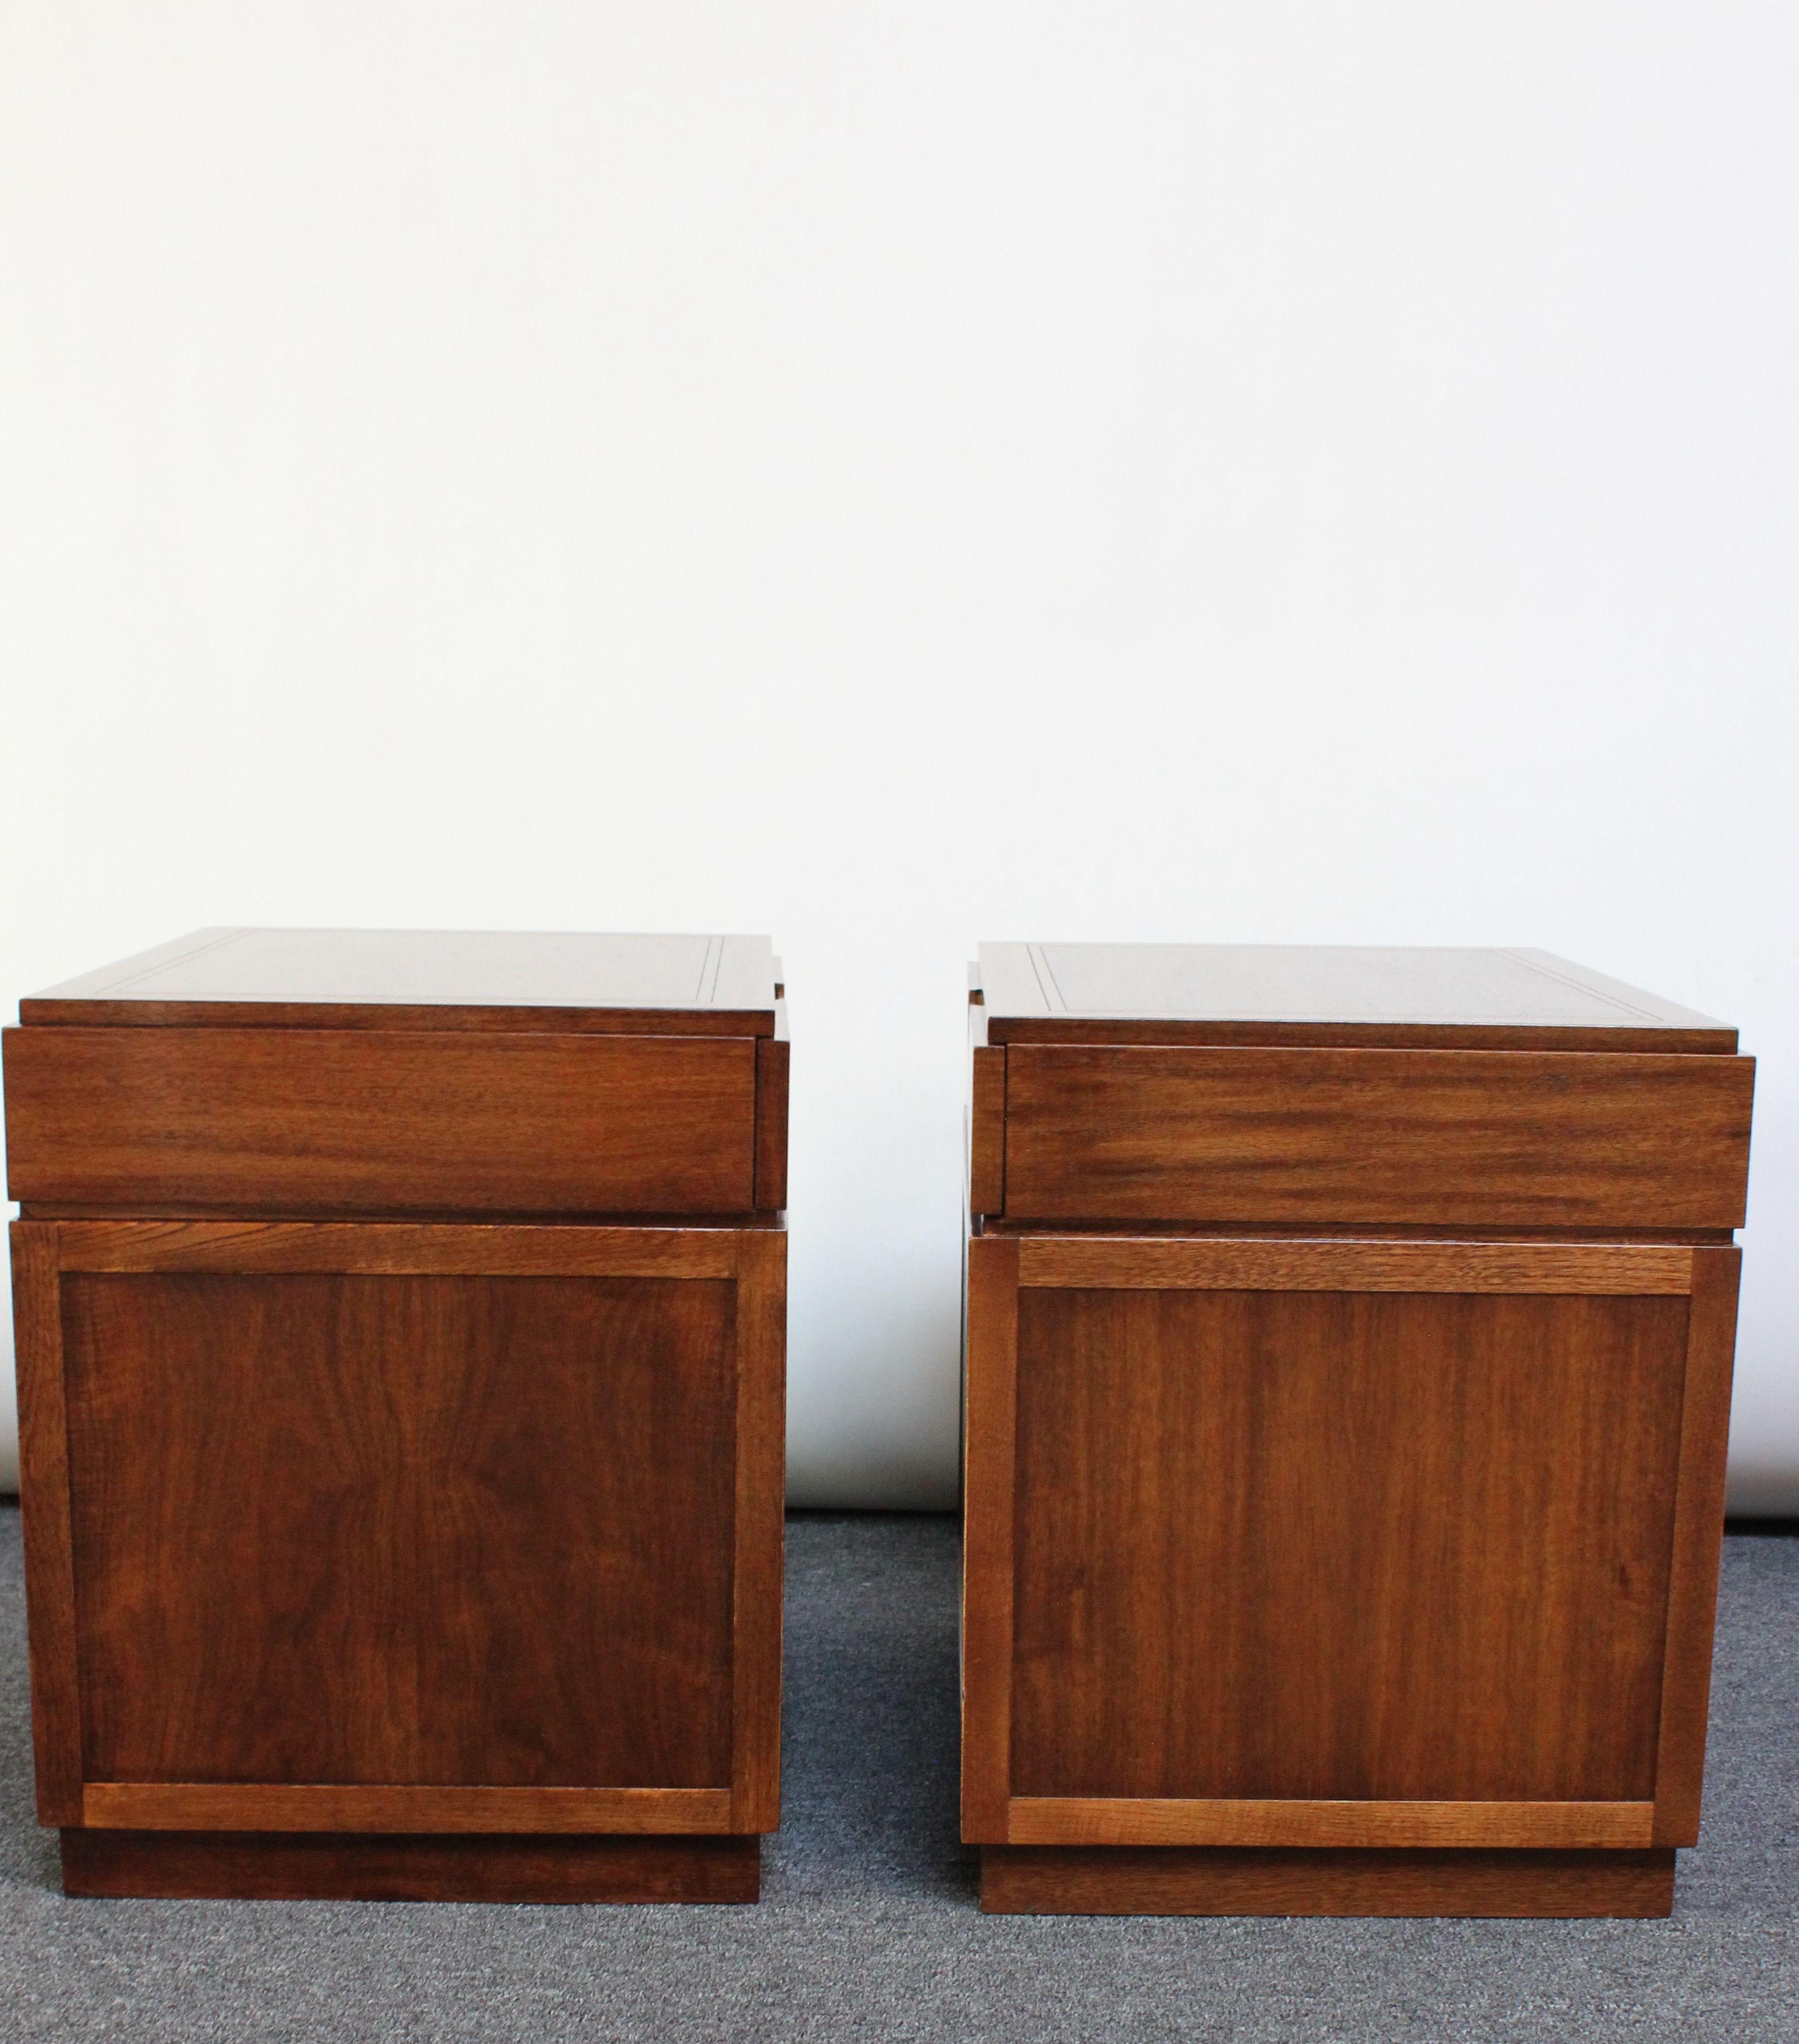 Pair of Vintage Walnut and Brass Nightstands by Baker For Sale 1